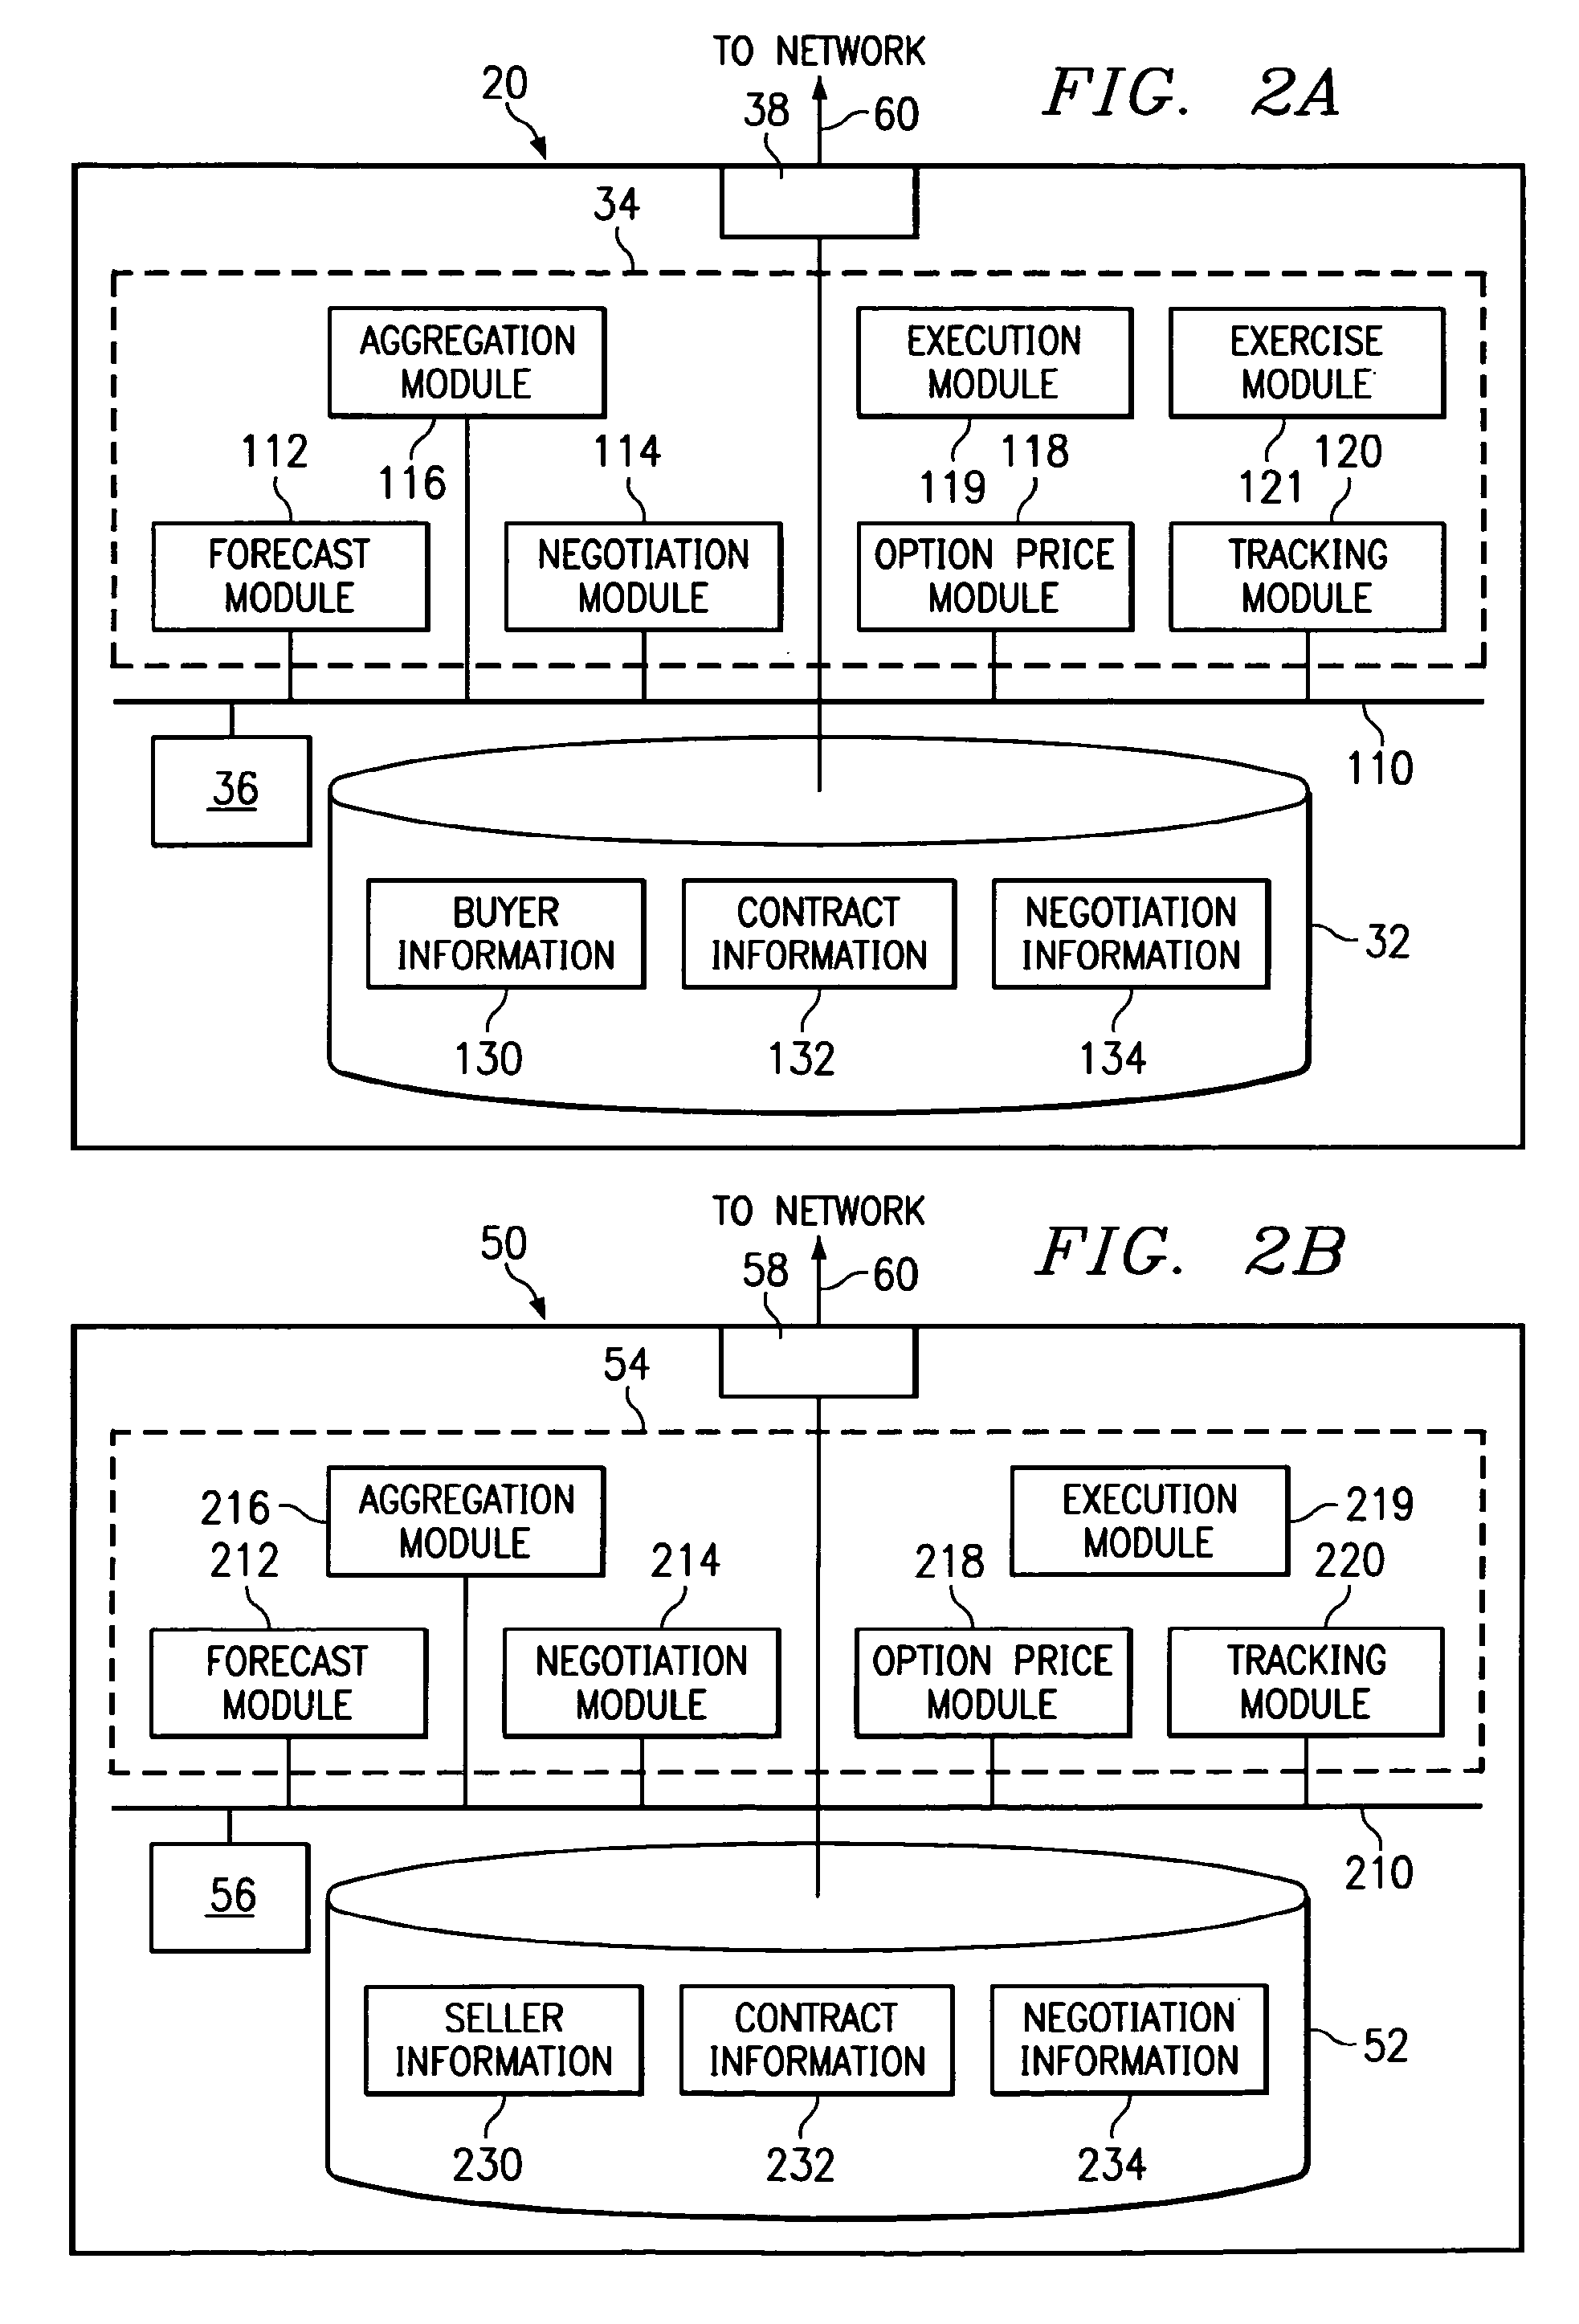 Method and System for Multi-Enterprise Optimization Using Flexible Trade Contracts